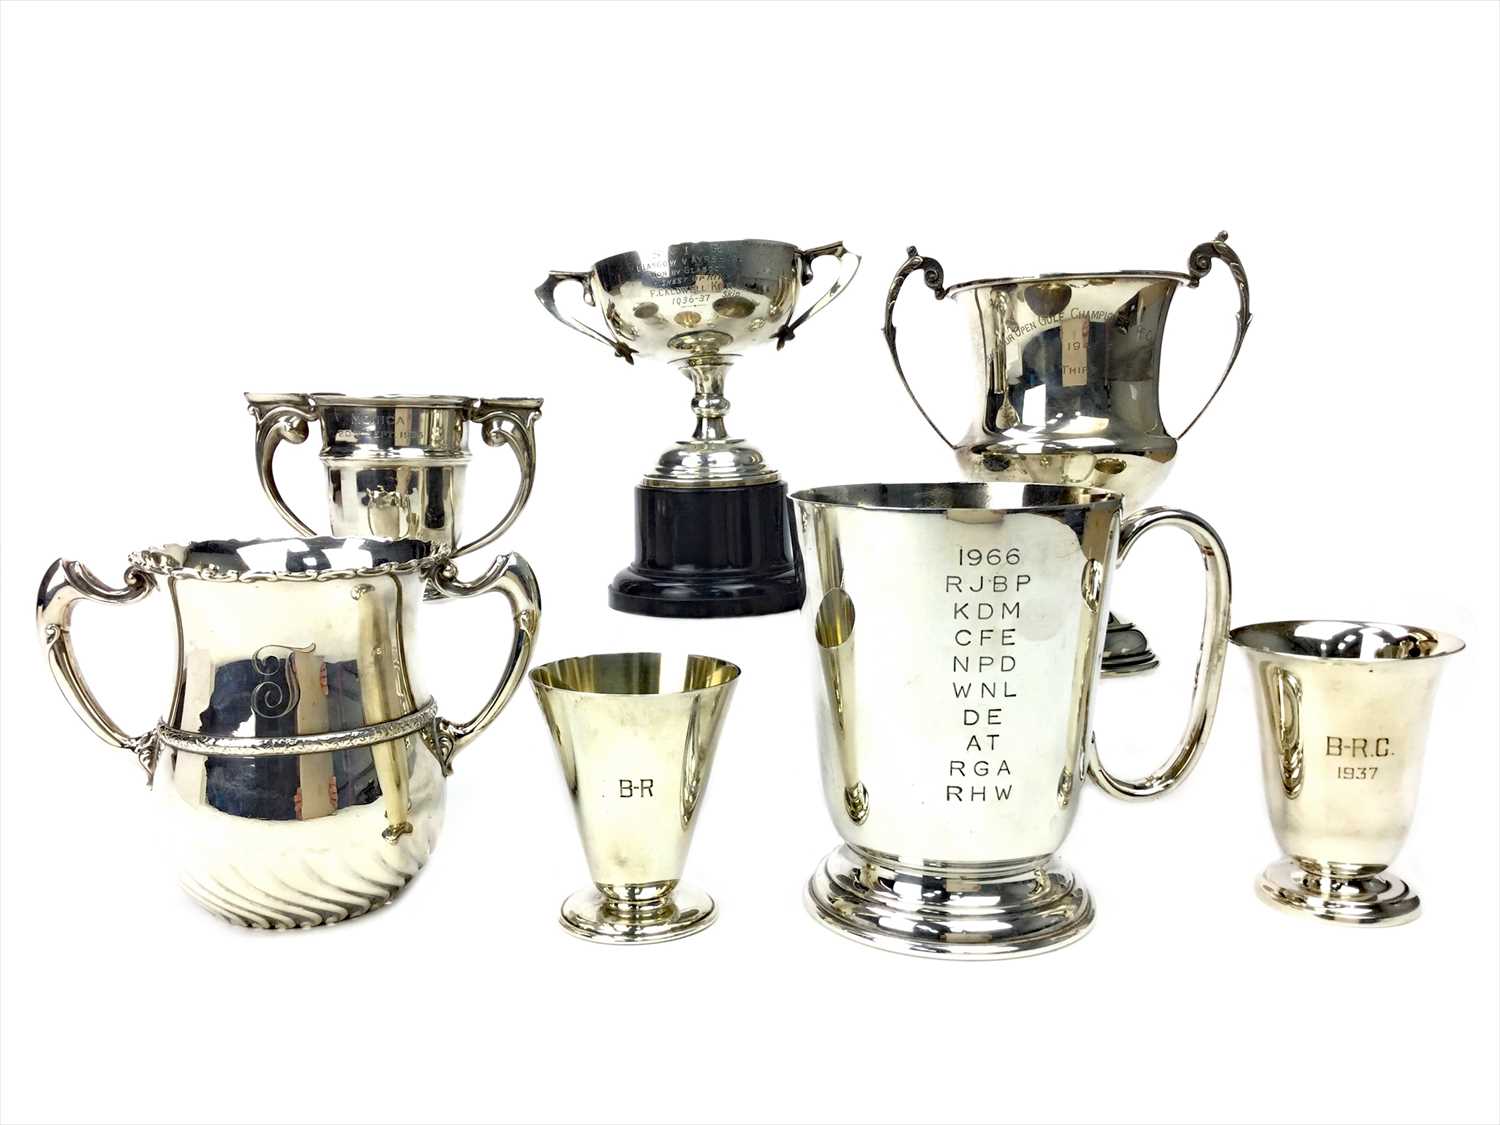 Lot 1736 - THE AMATEUR OPEN GOLF CHAMPIONSHIP OF CHINA 1941 SILVER TROPHY ALONG WITH SIX OTHER TROPHIES